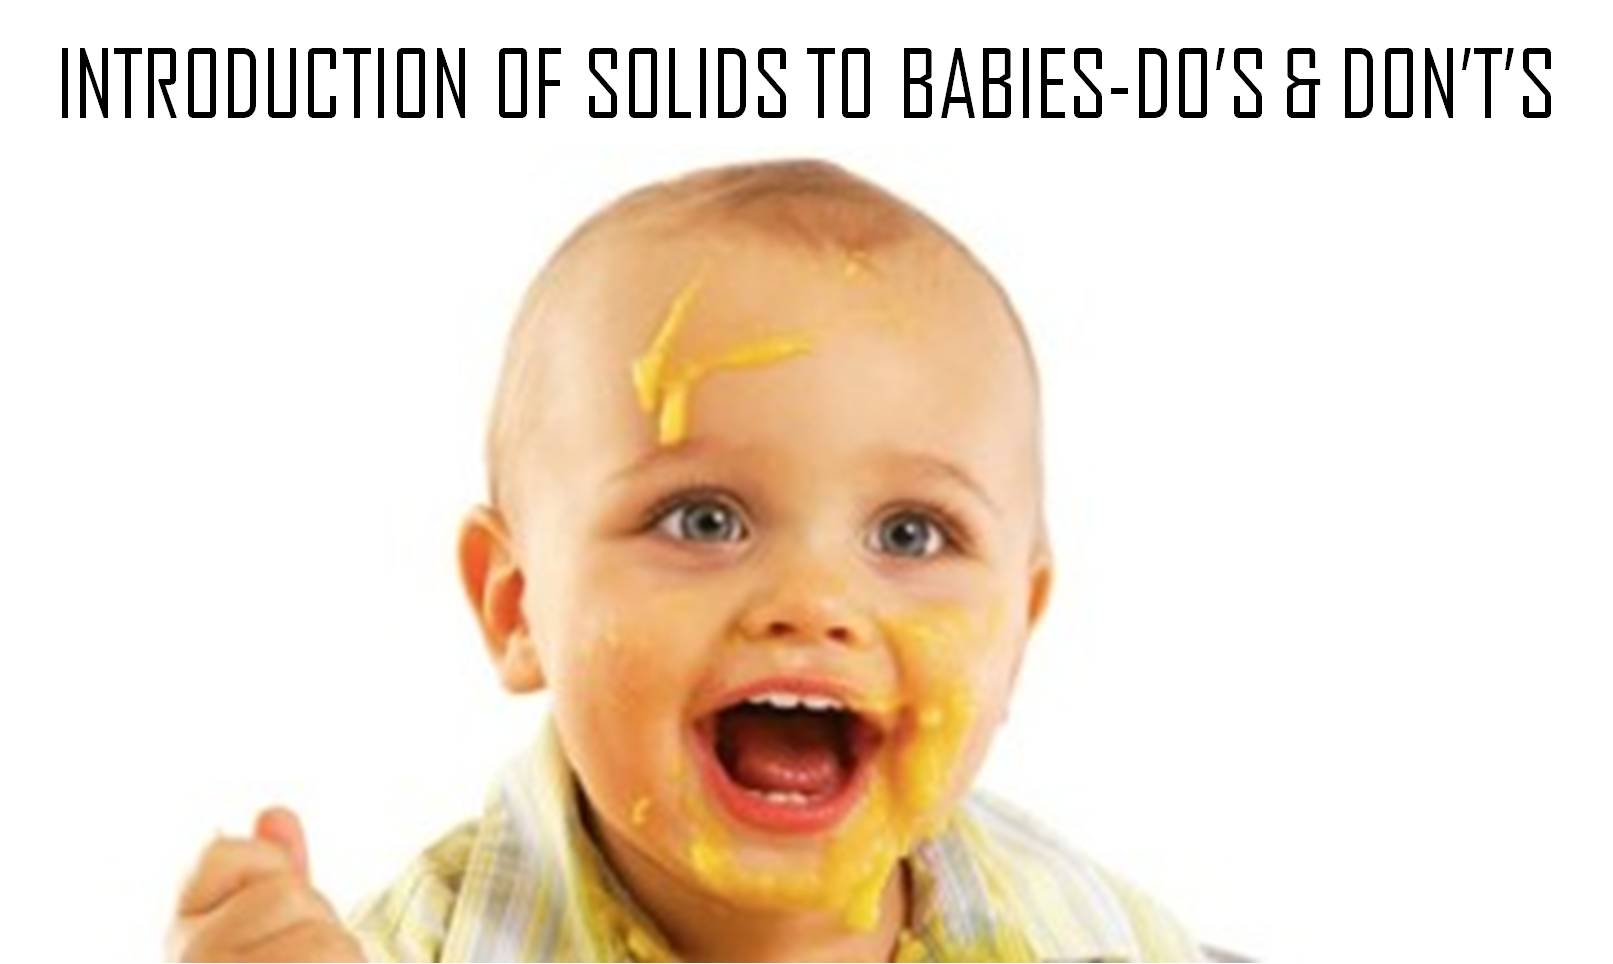 introducing solids to baby